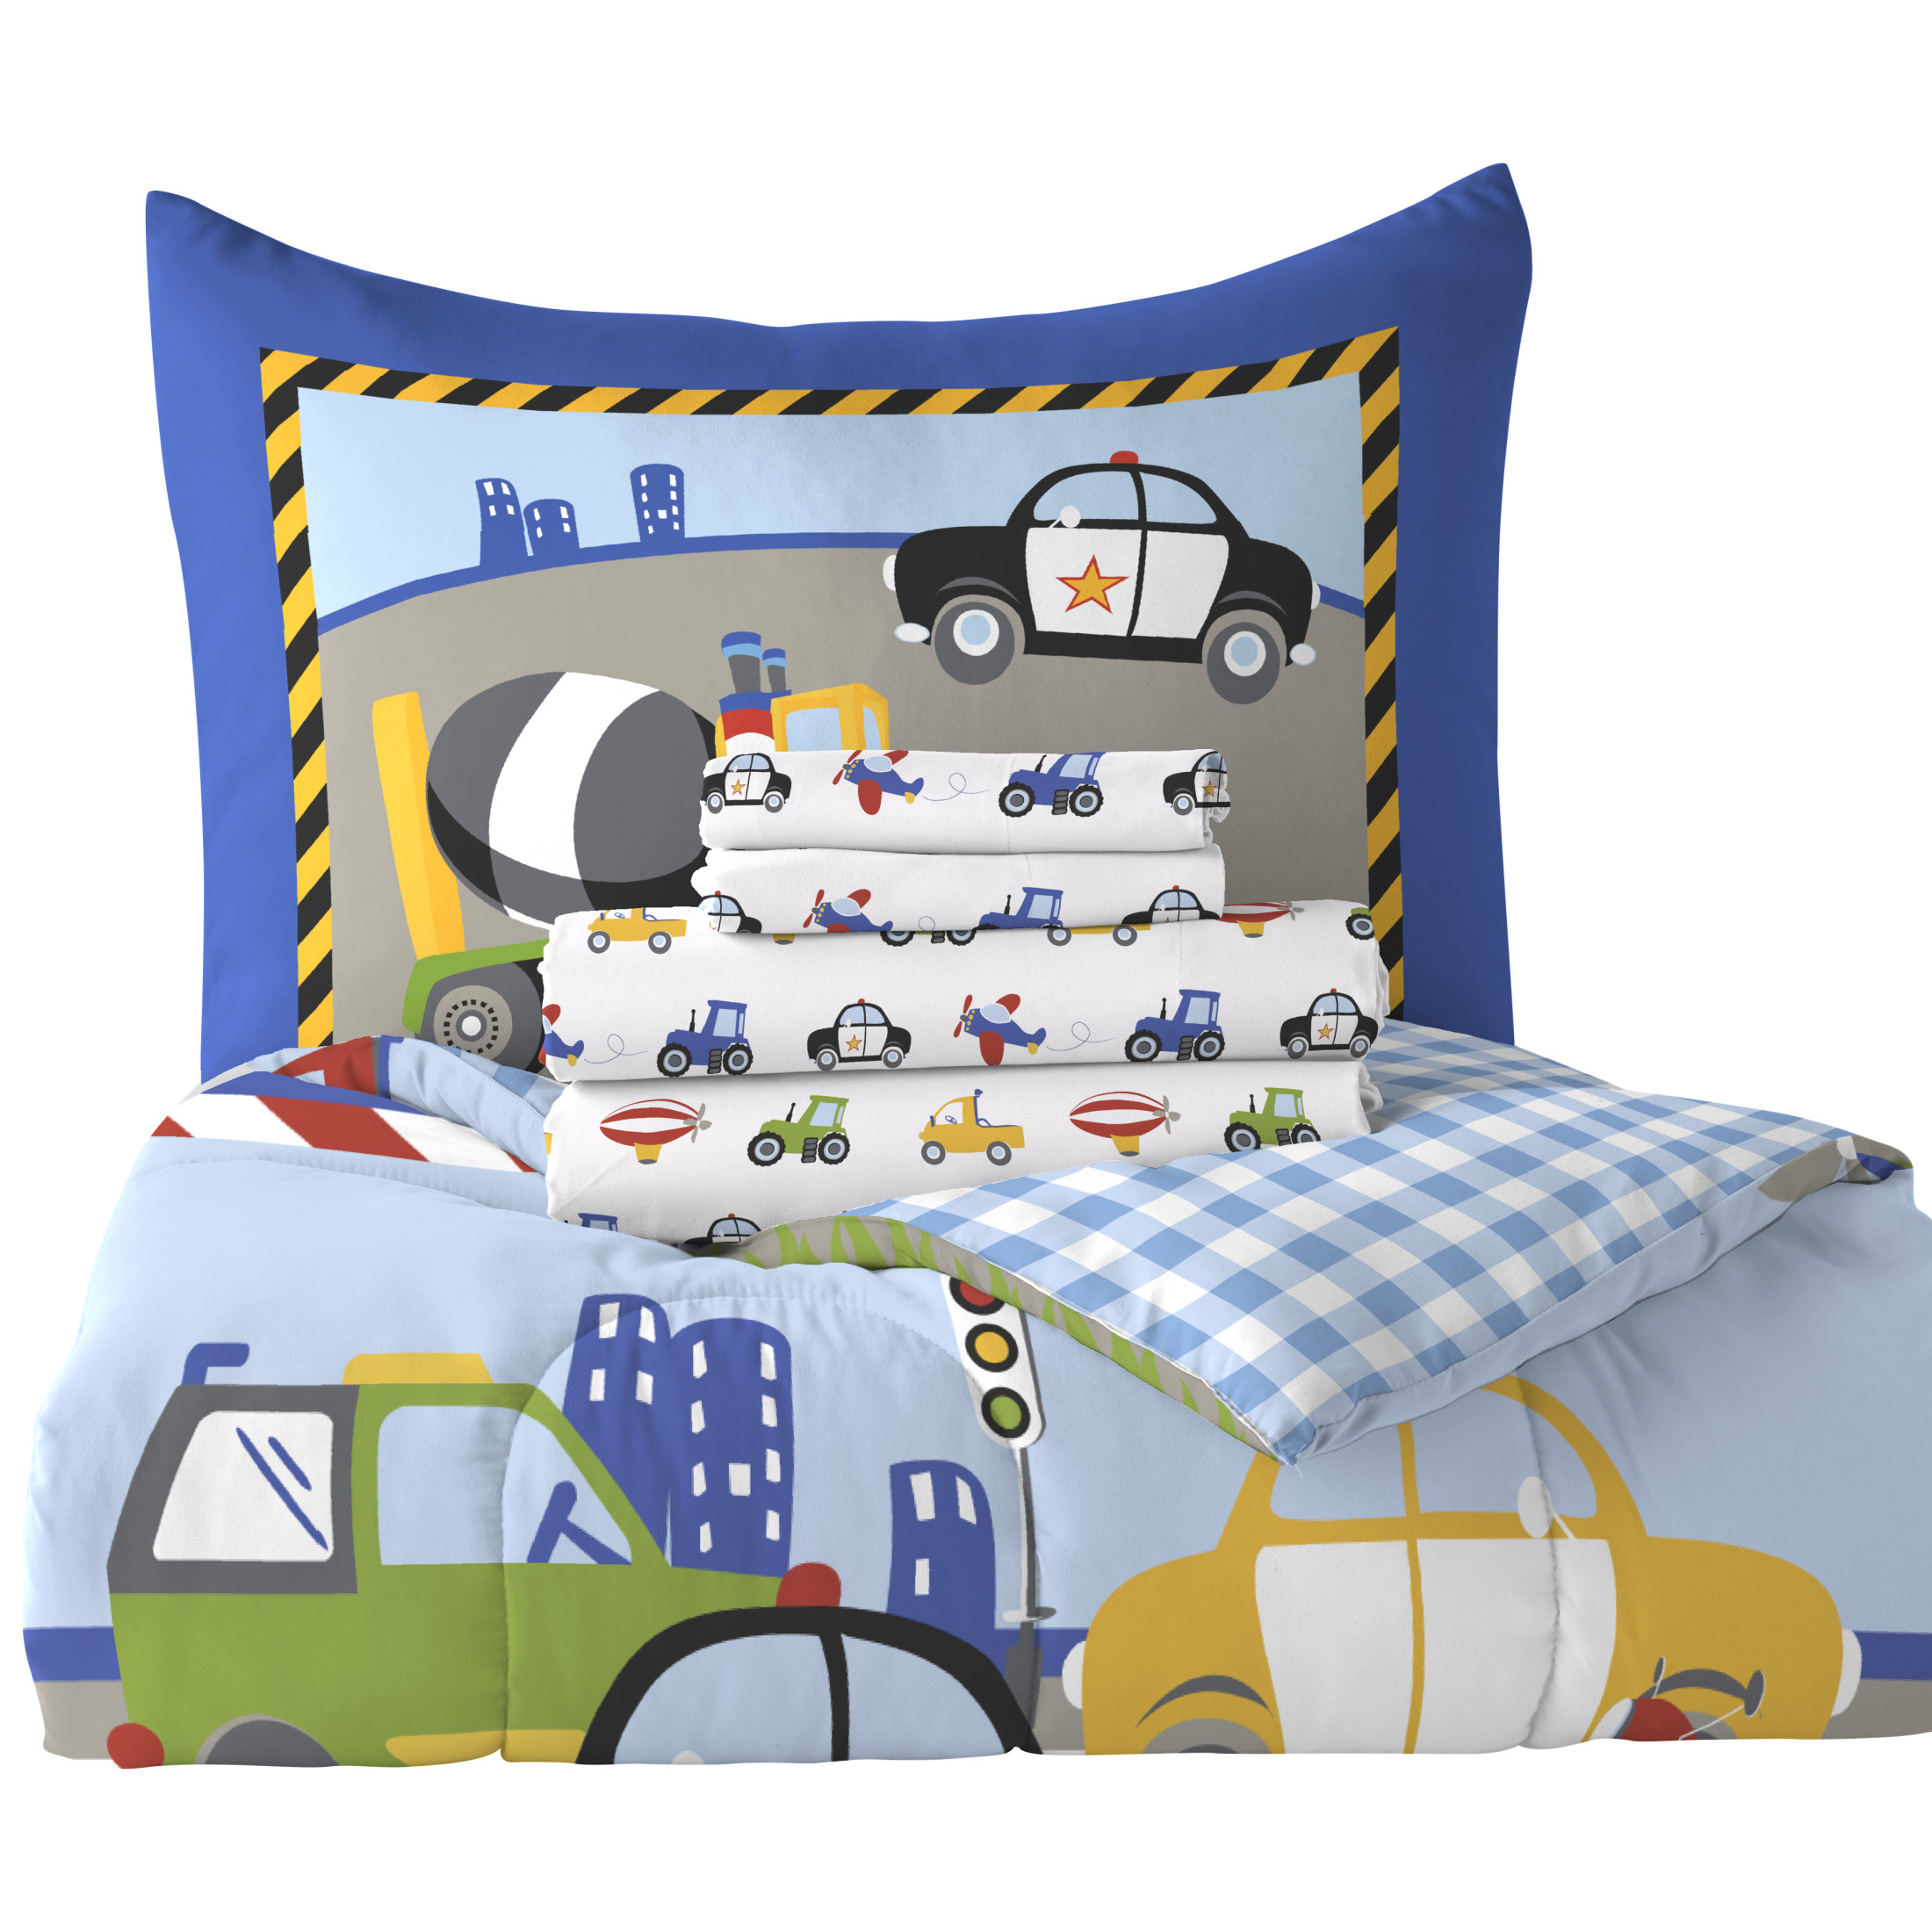 Dream Factory Trains and Truck Pattern Twin 5 Piece Bed-in-a-Bag, Bed-in-a-Bag, Cotton/Polyester, Blue, Multi, Male, Child - image 2 of 6